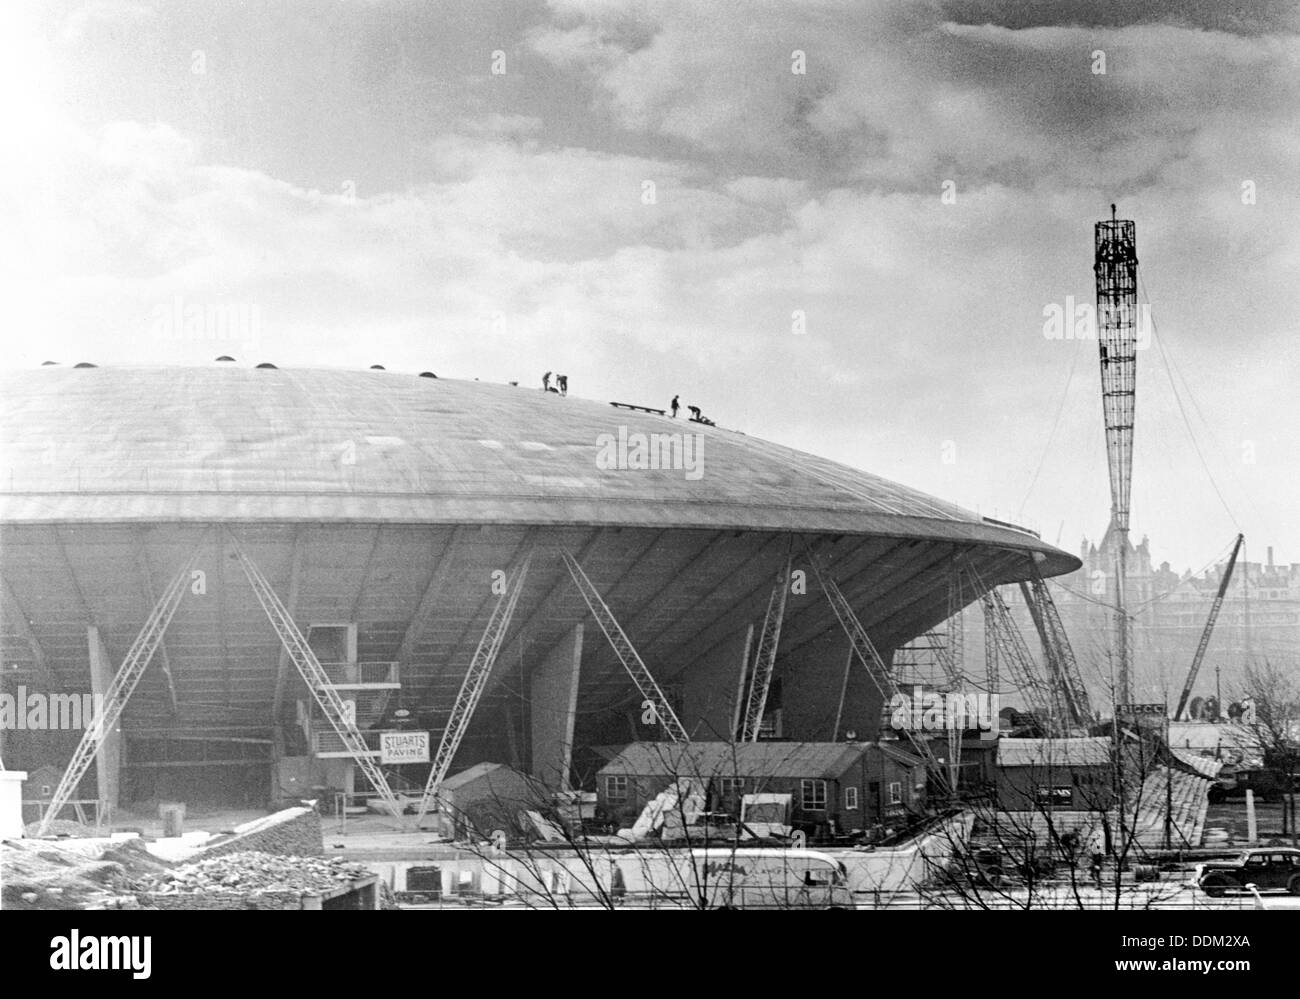 Construction of the Dome of Discovery, Festival of Britain, London, 1951.  Artist: Henry Grant Stock Photo - Alamy